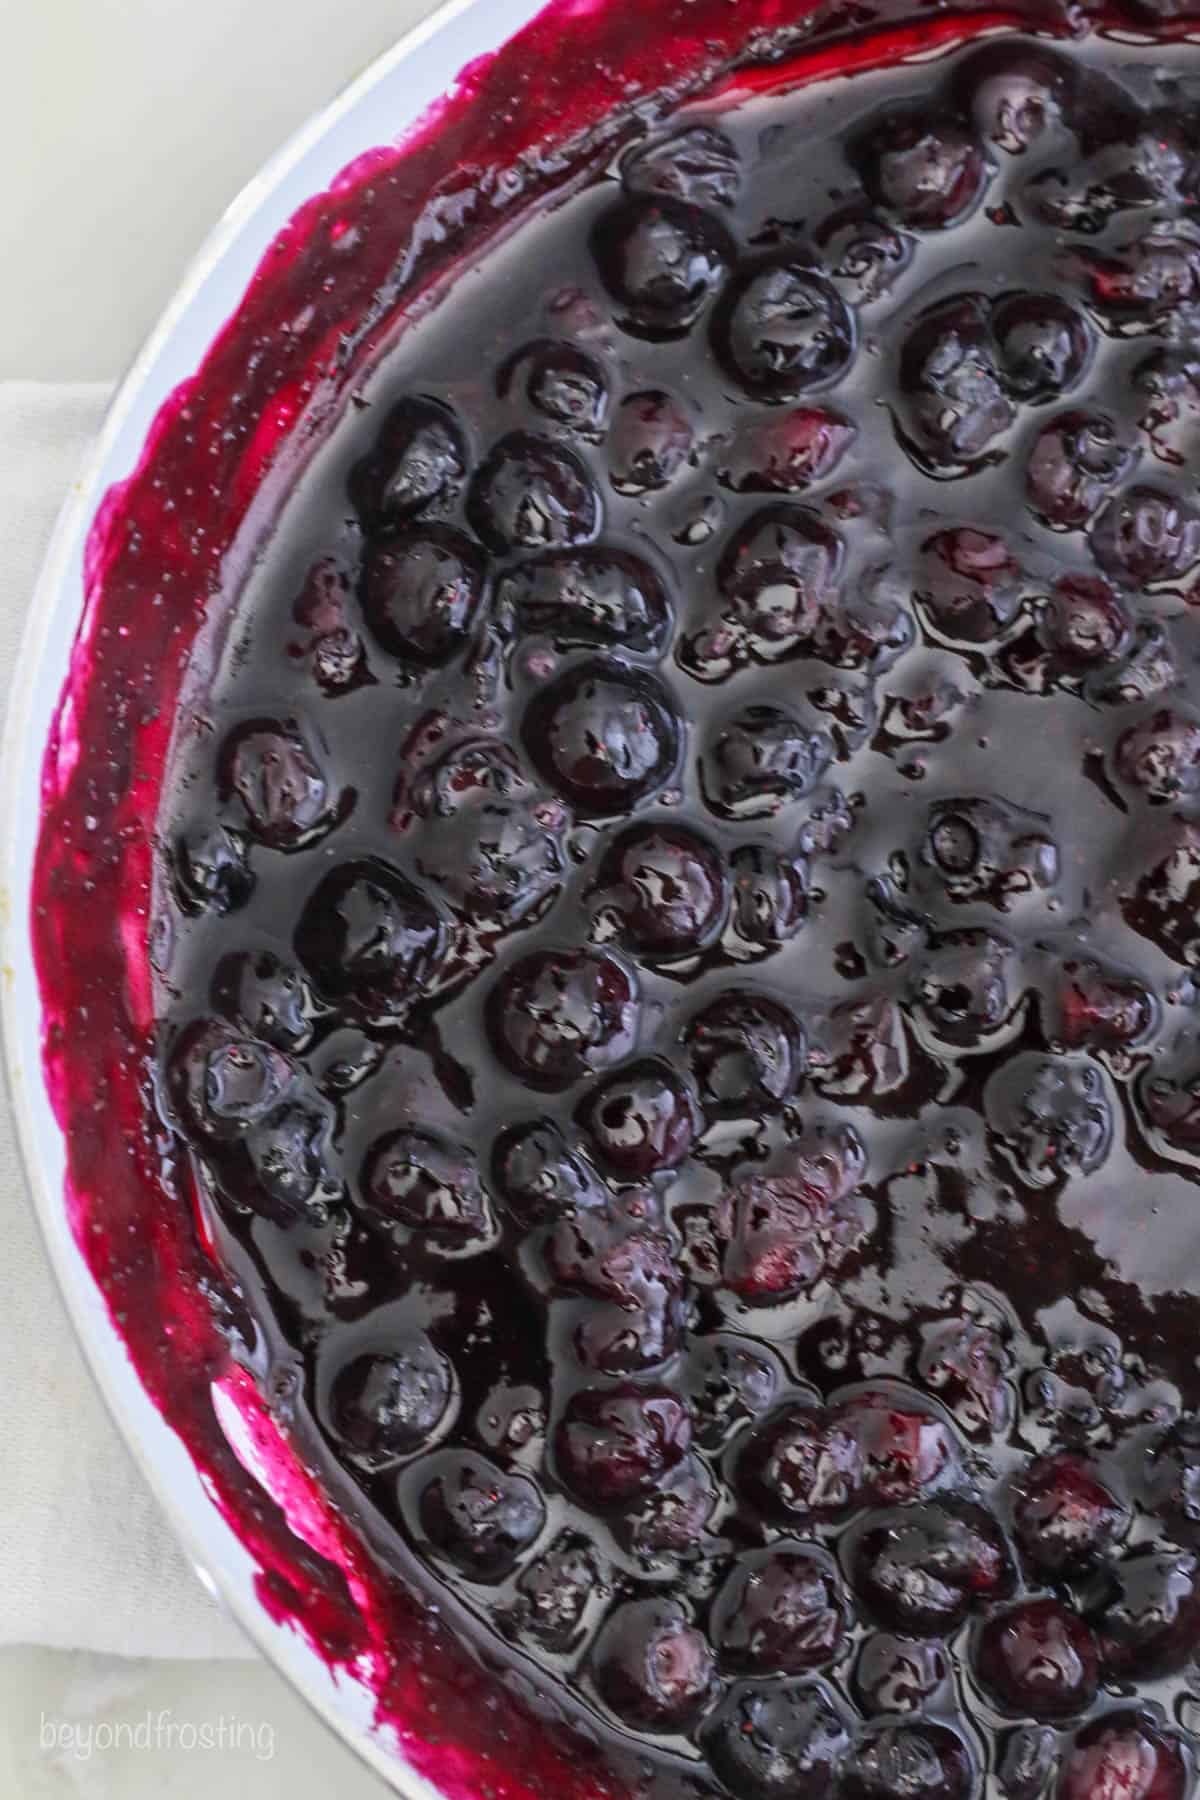 A close up of sauce pan with reduced blueberries